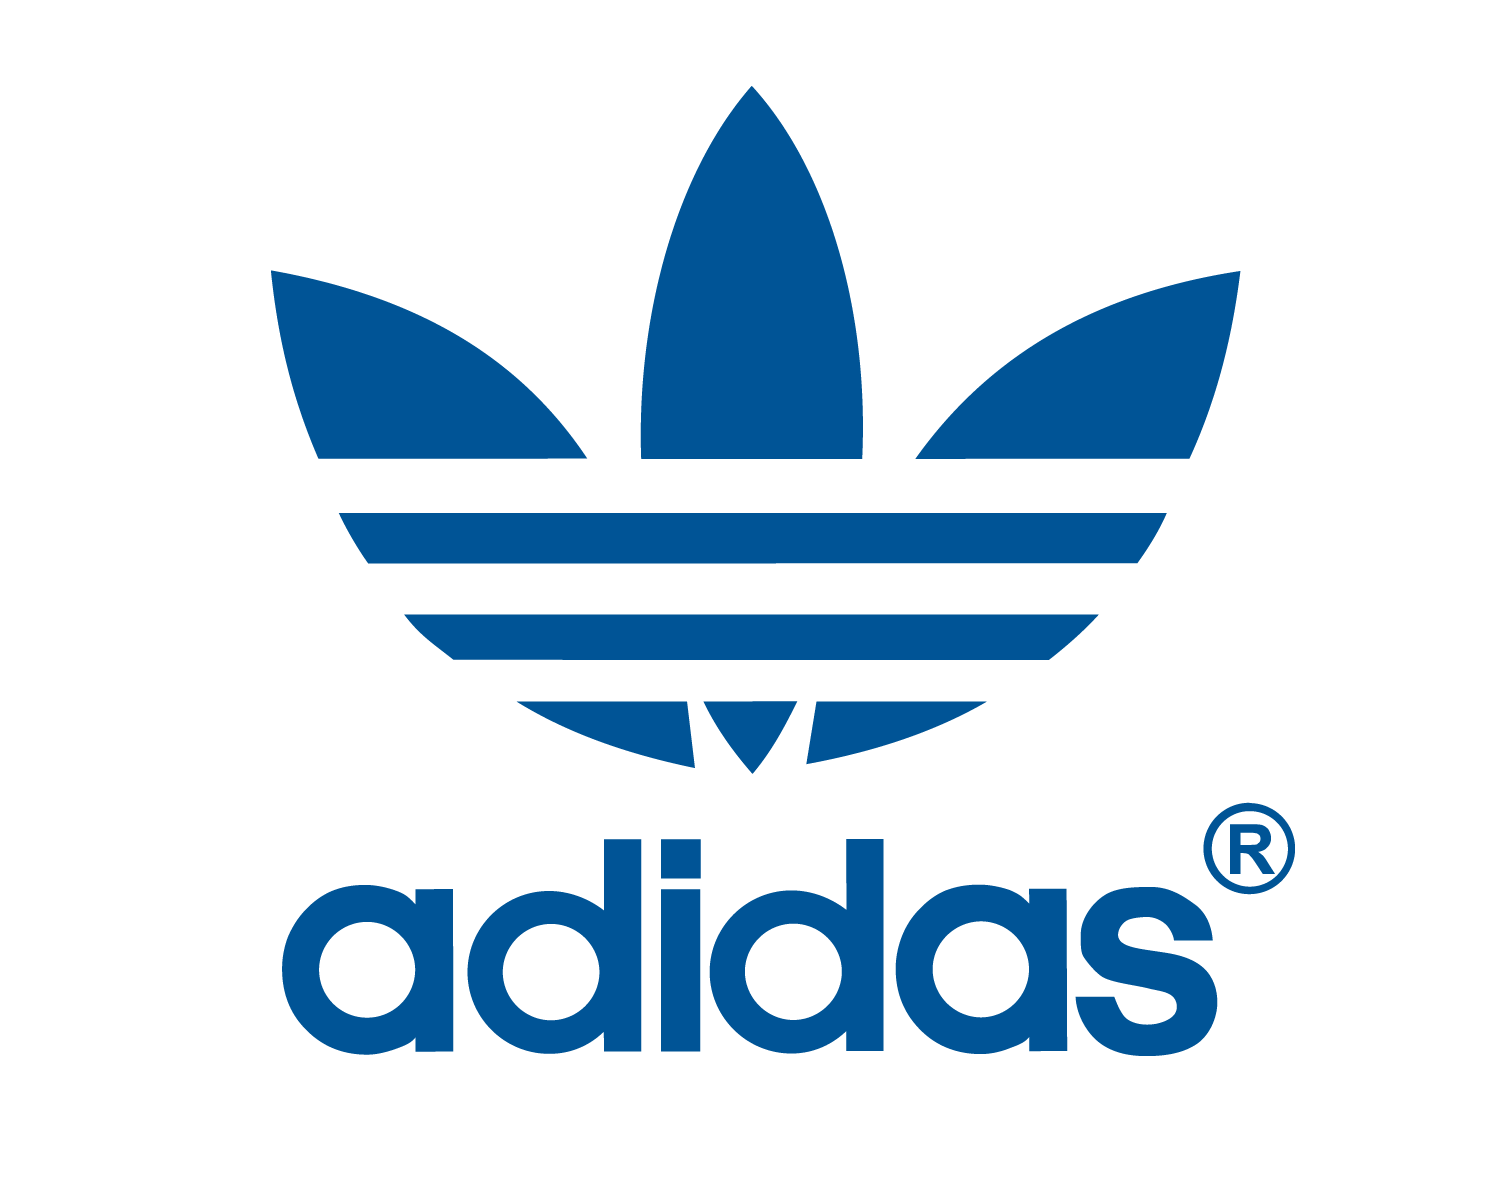 More information about "adidas"